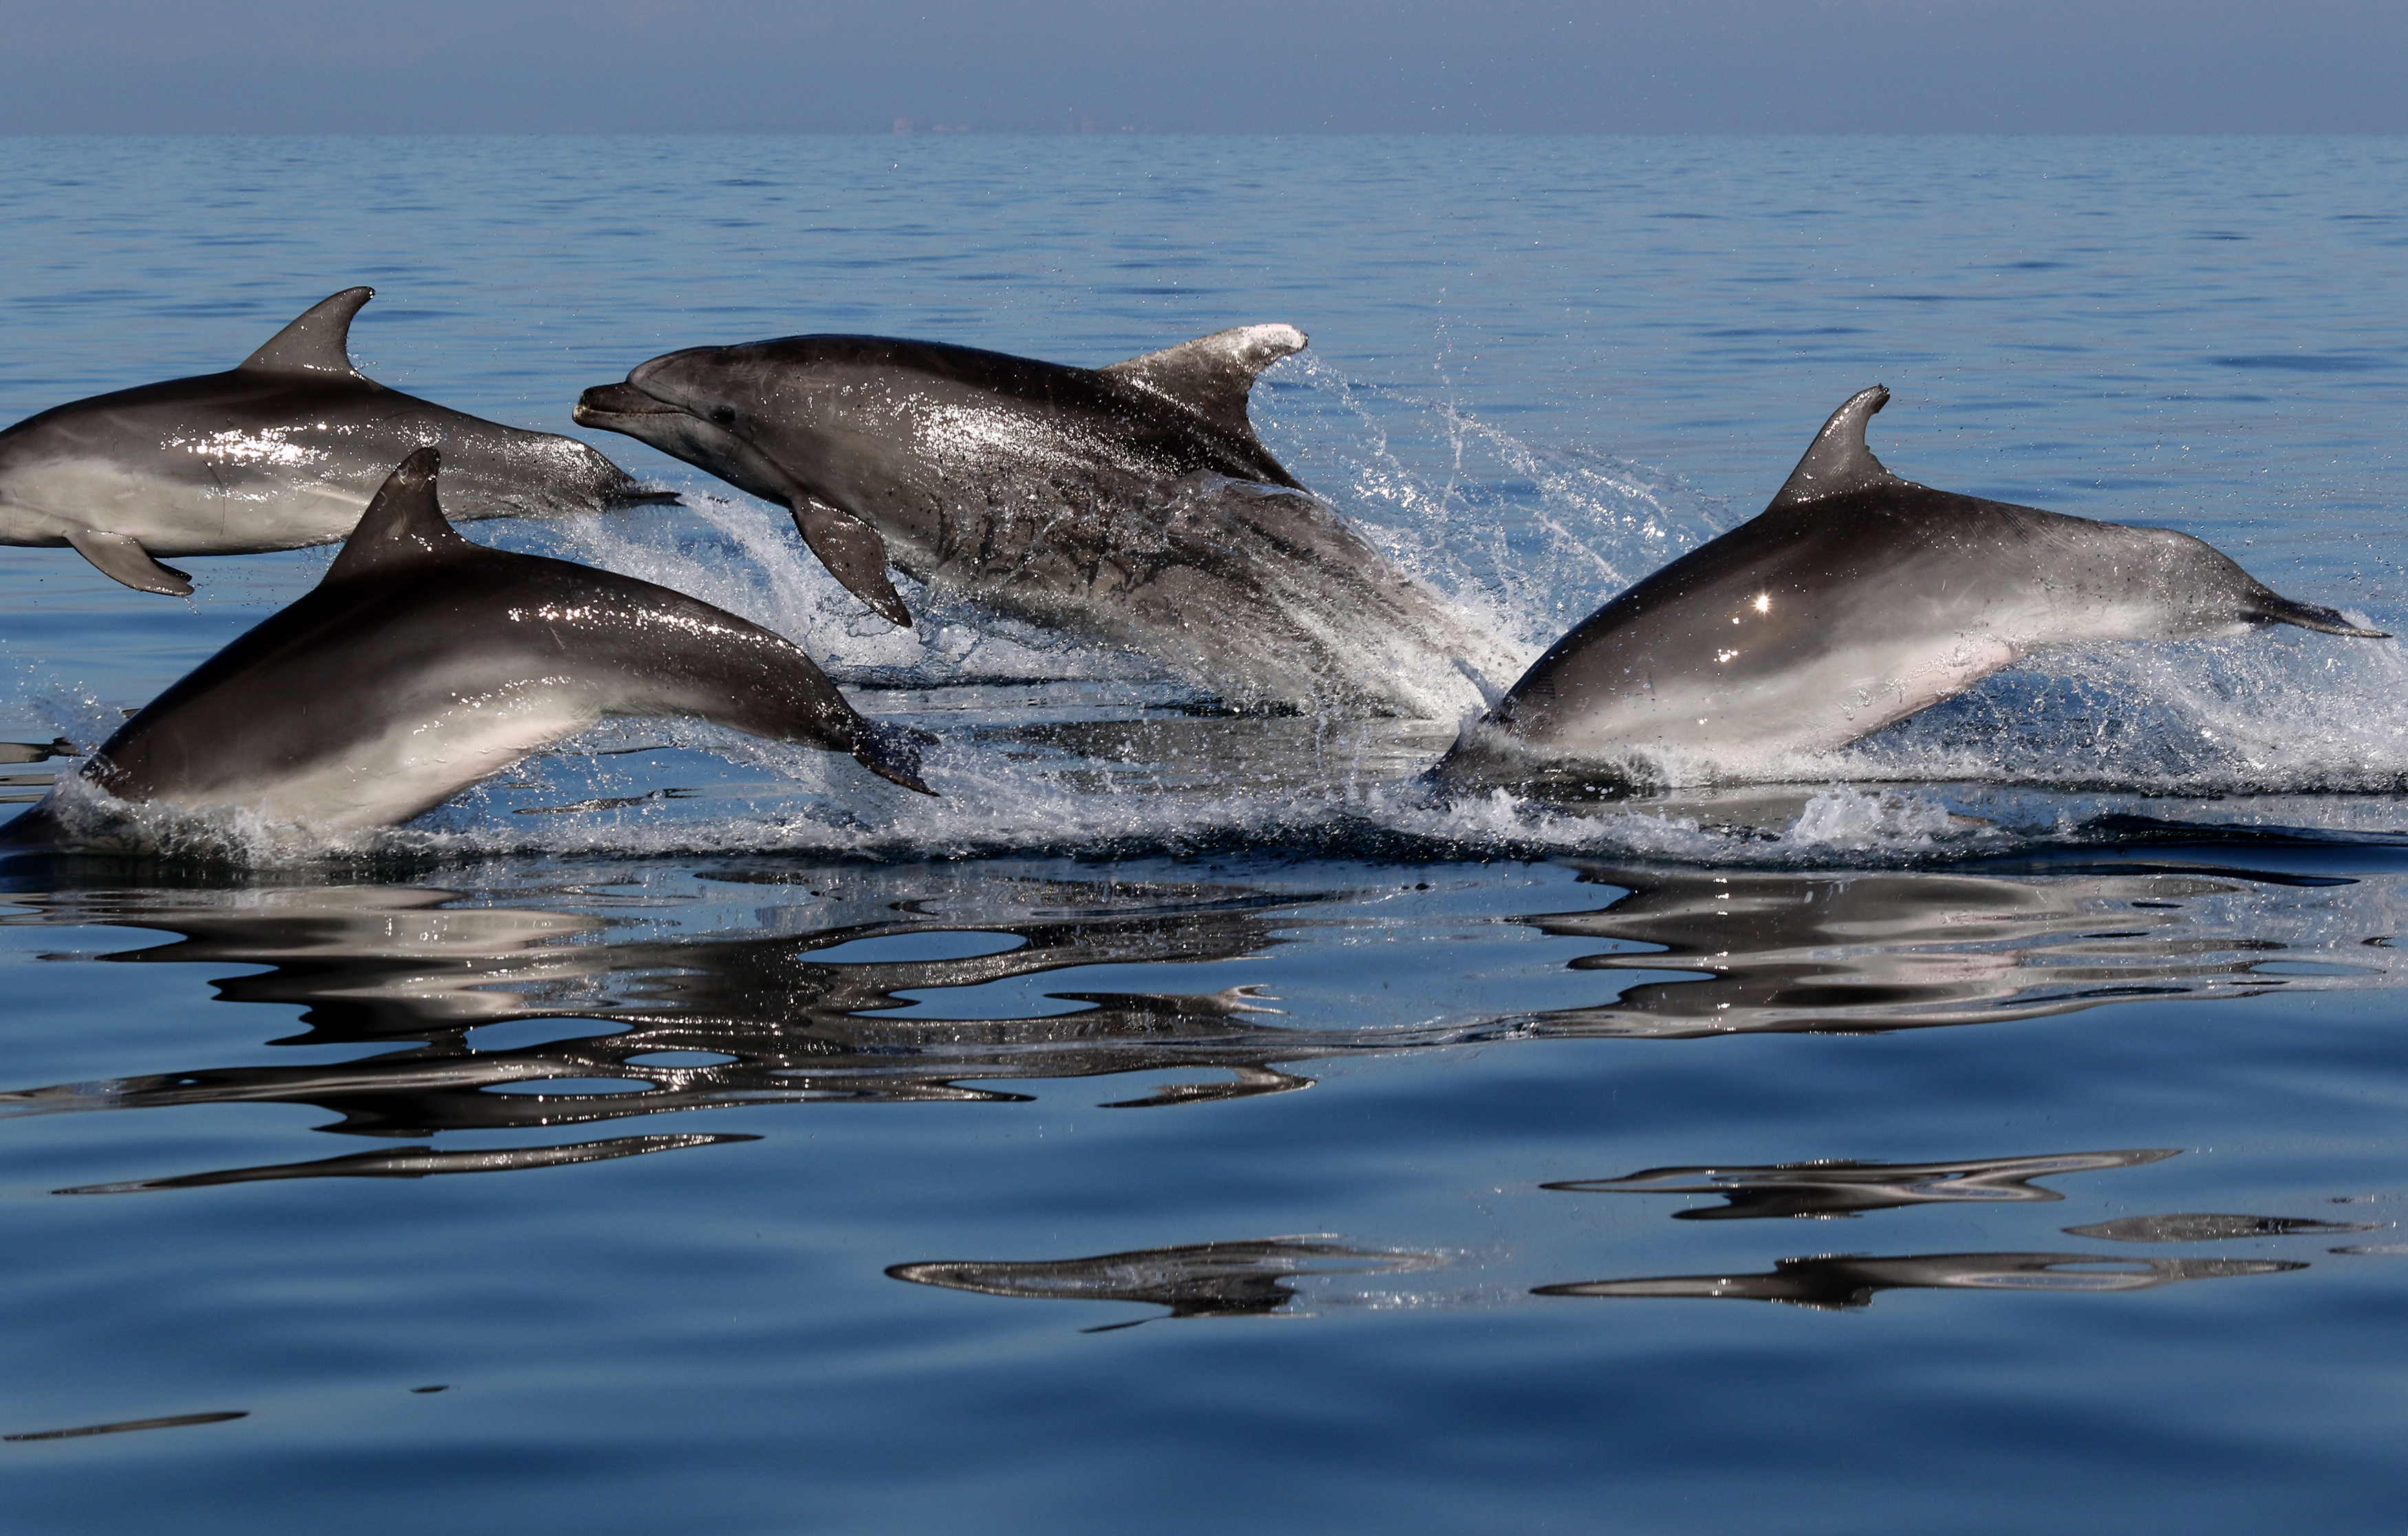 the dolphins have been studied for more than 16 years